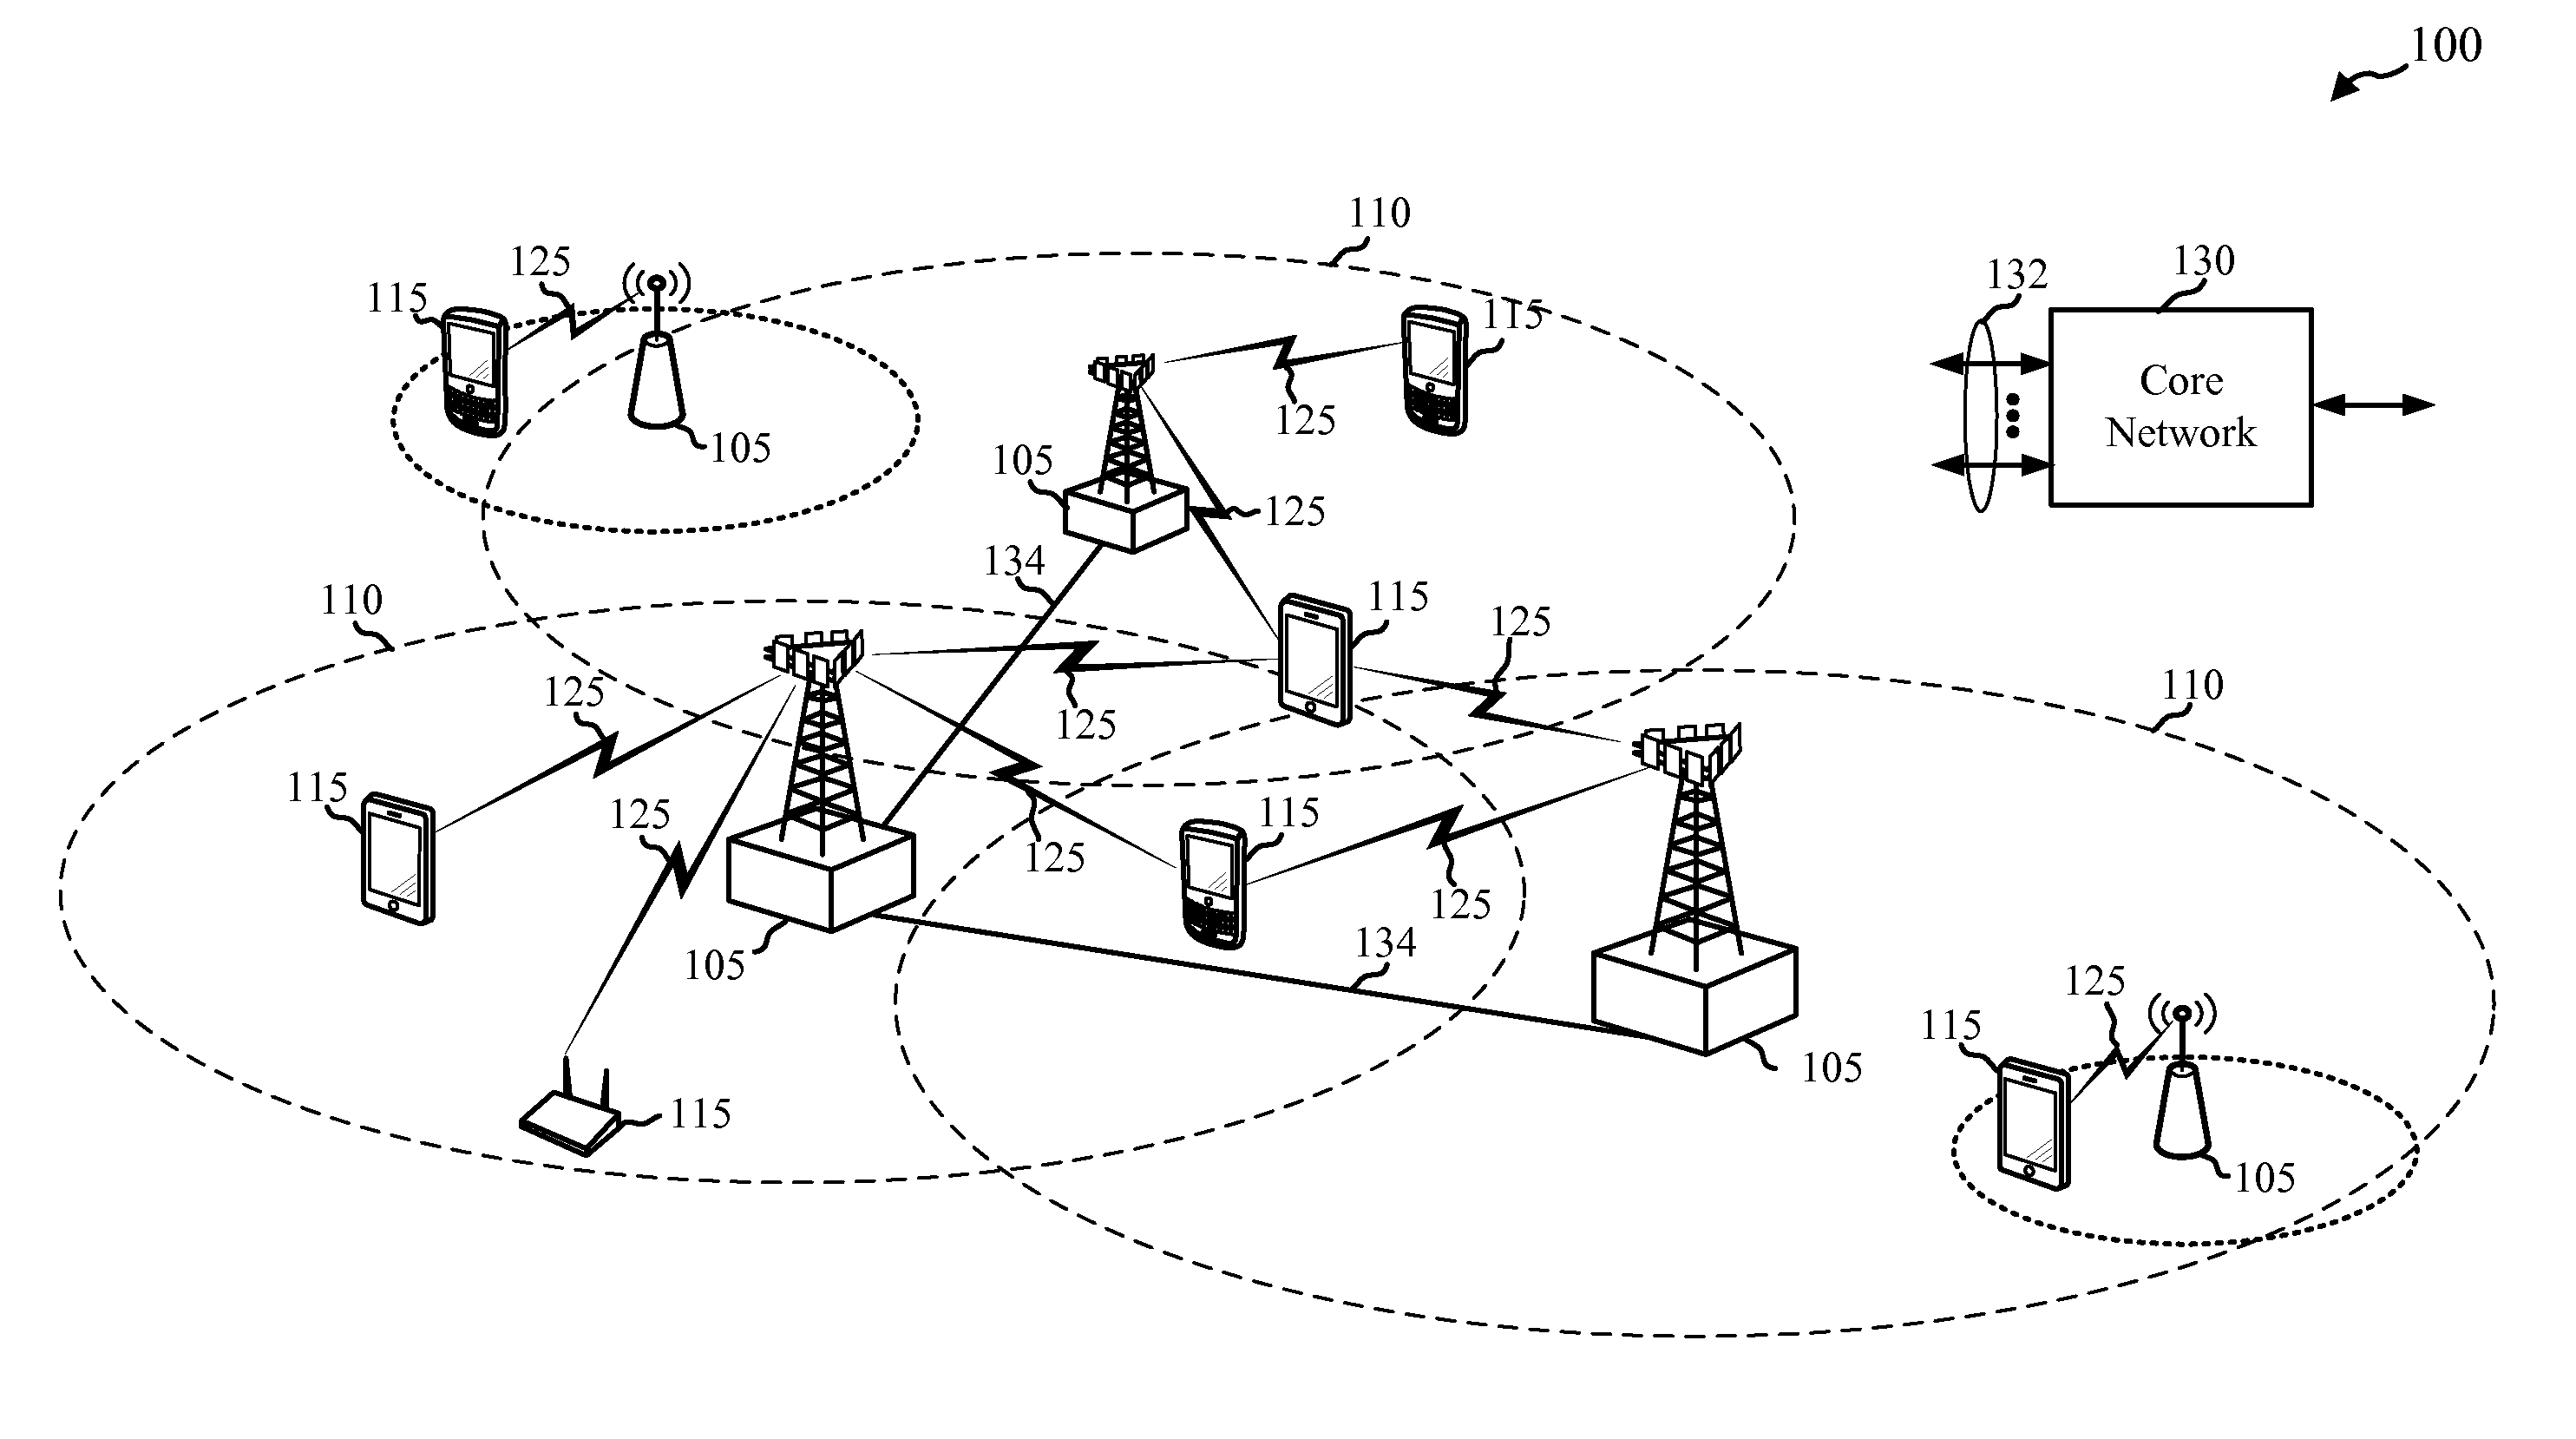 Emergency data transmission over unlicensed radio frequency spectrum band